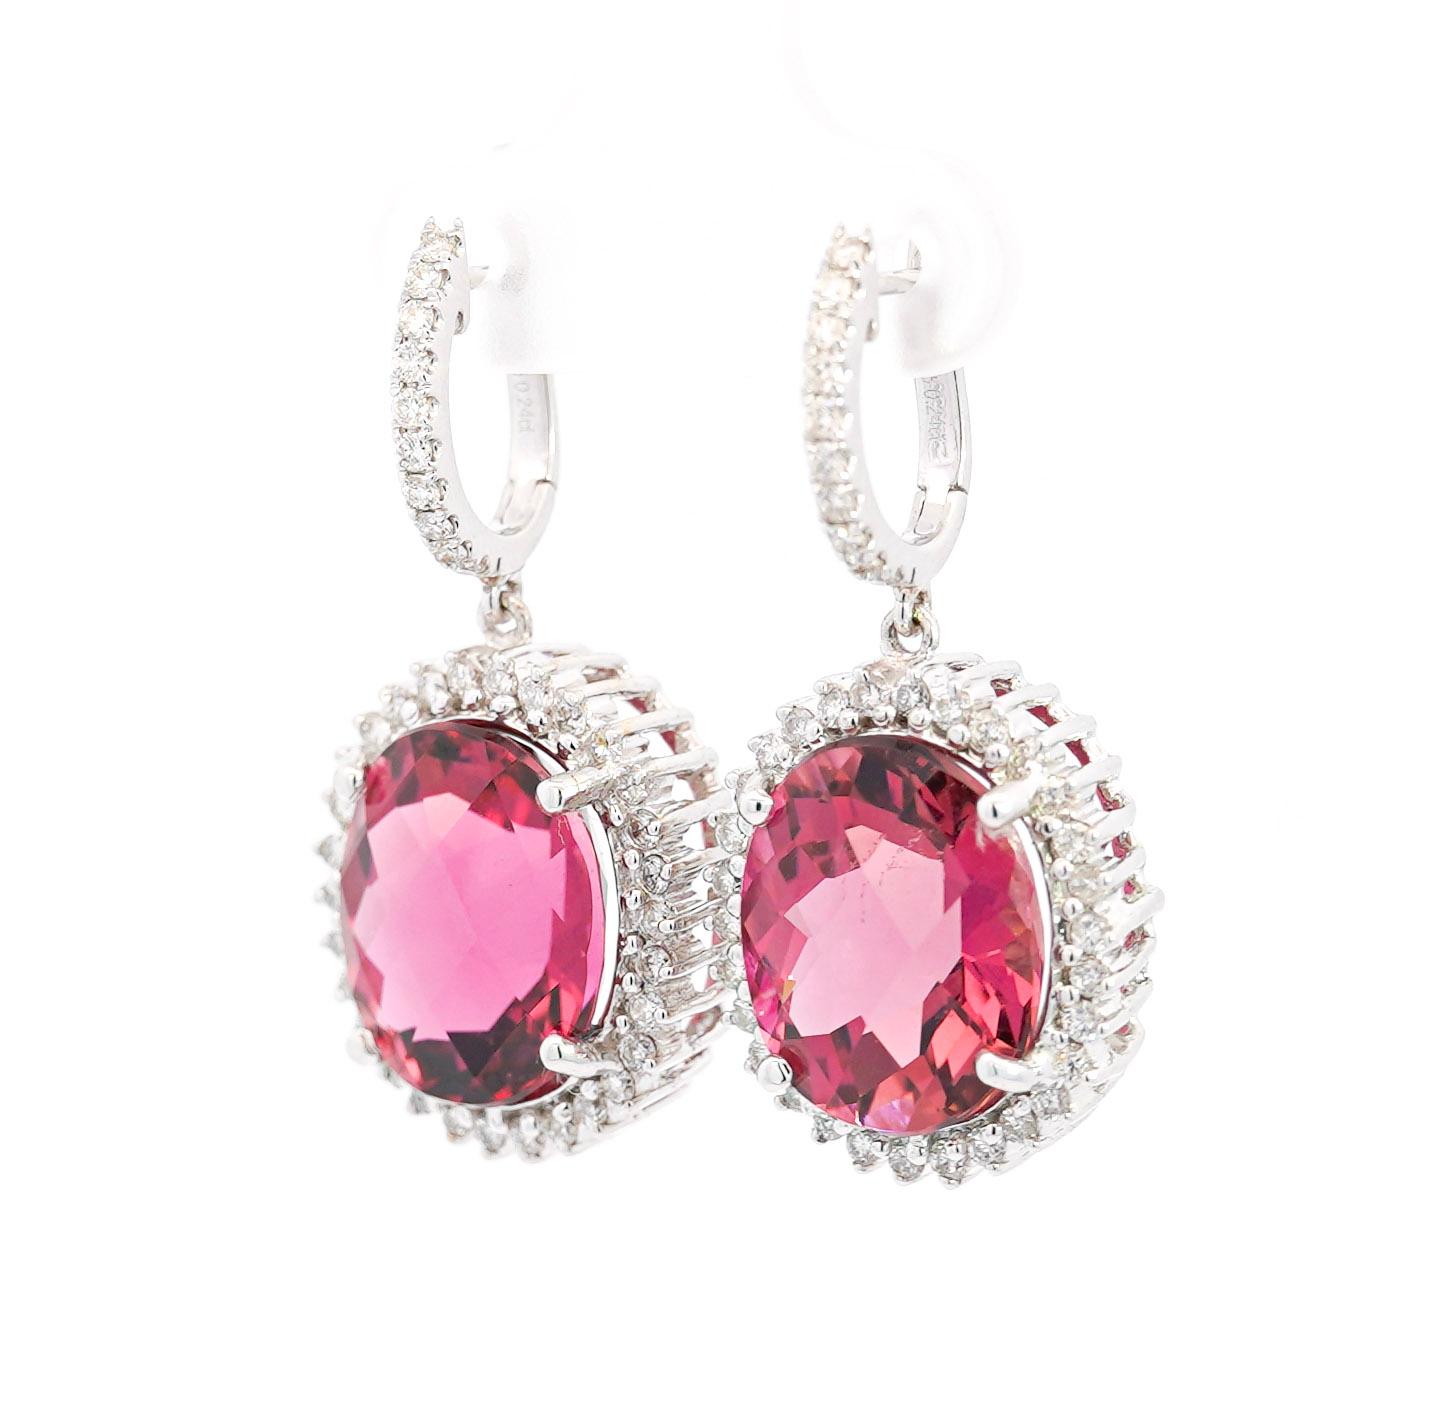 16 Carat Checkerboard Oval-Cut Pink Tourmaline and Diamond Halo Drop Earrings In New Condition For Sale In Miami, FL